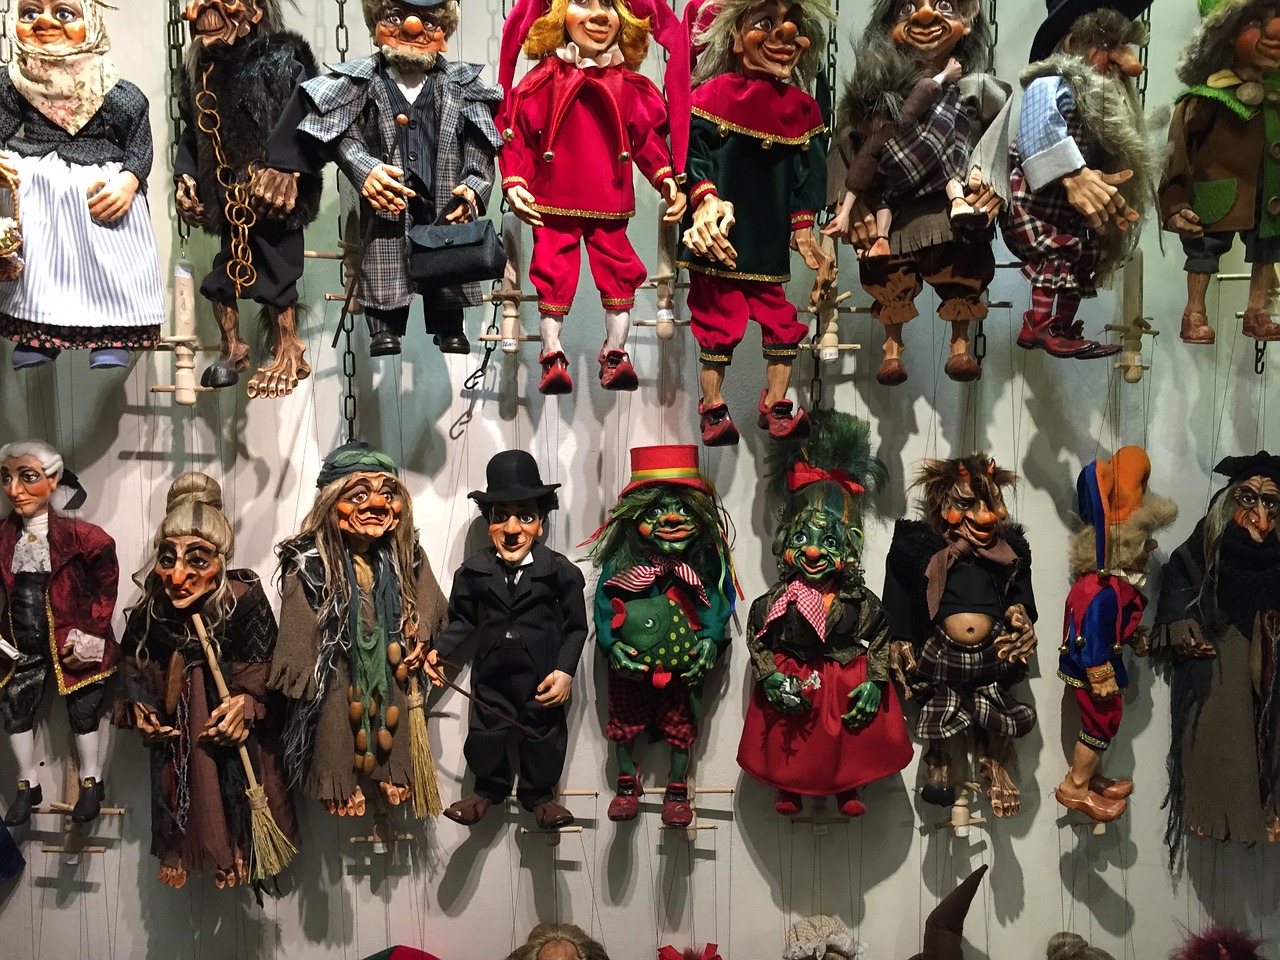 Wall of puppets